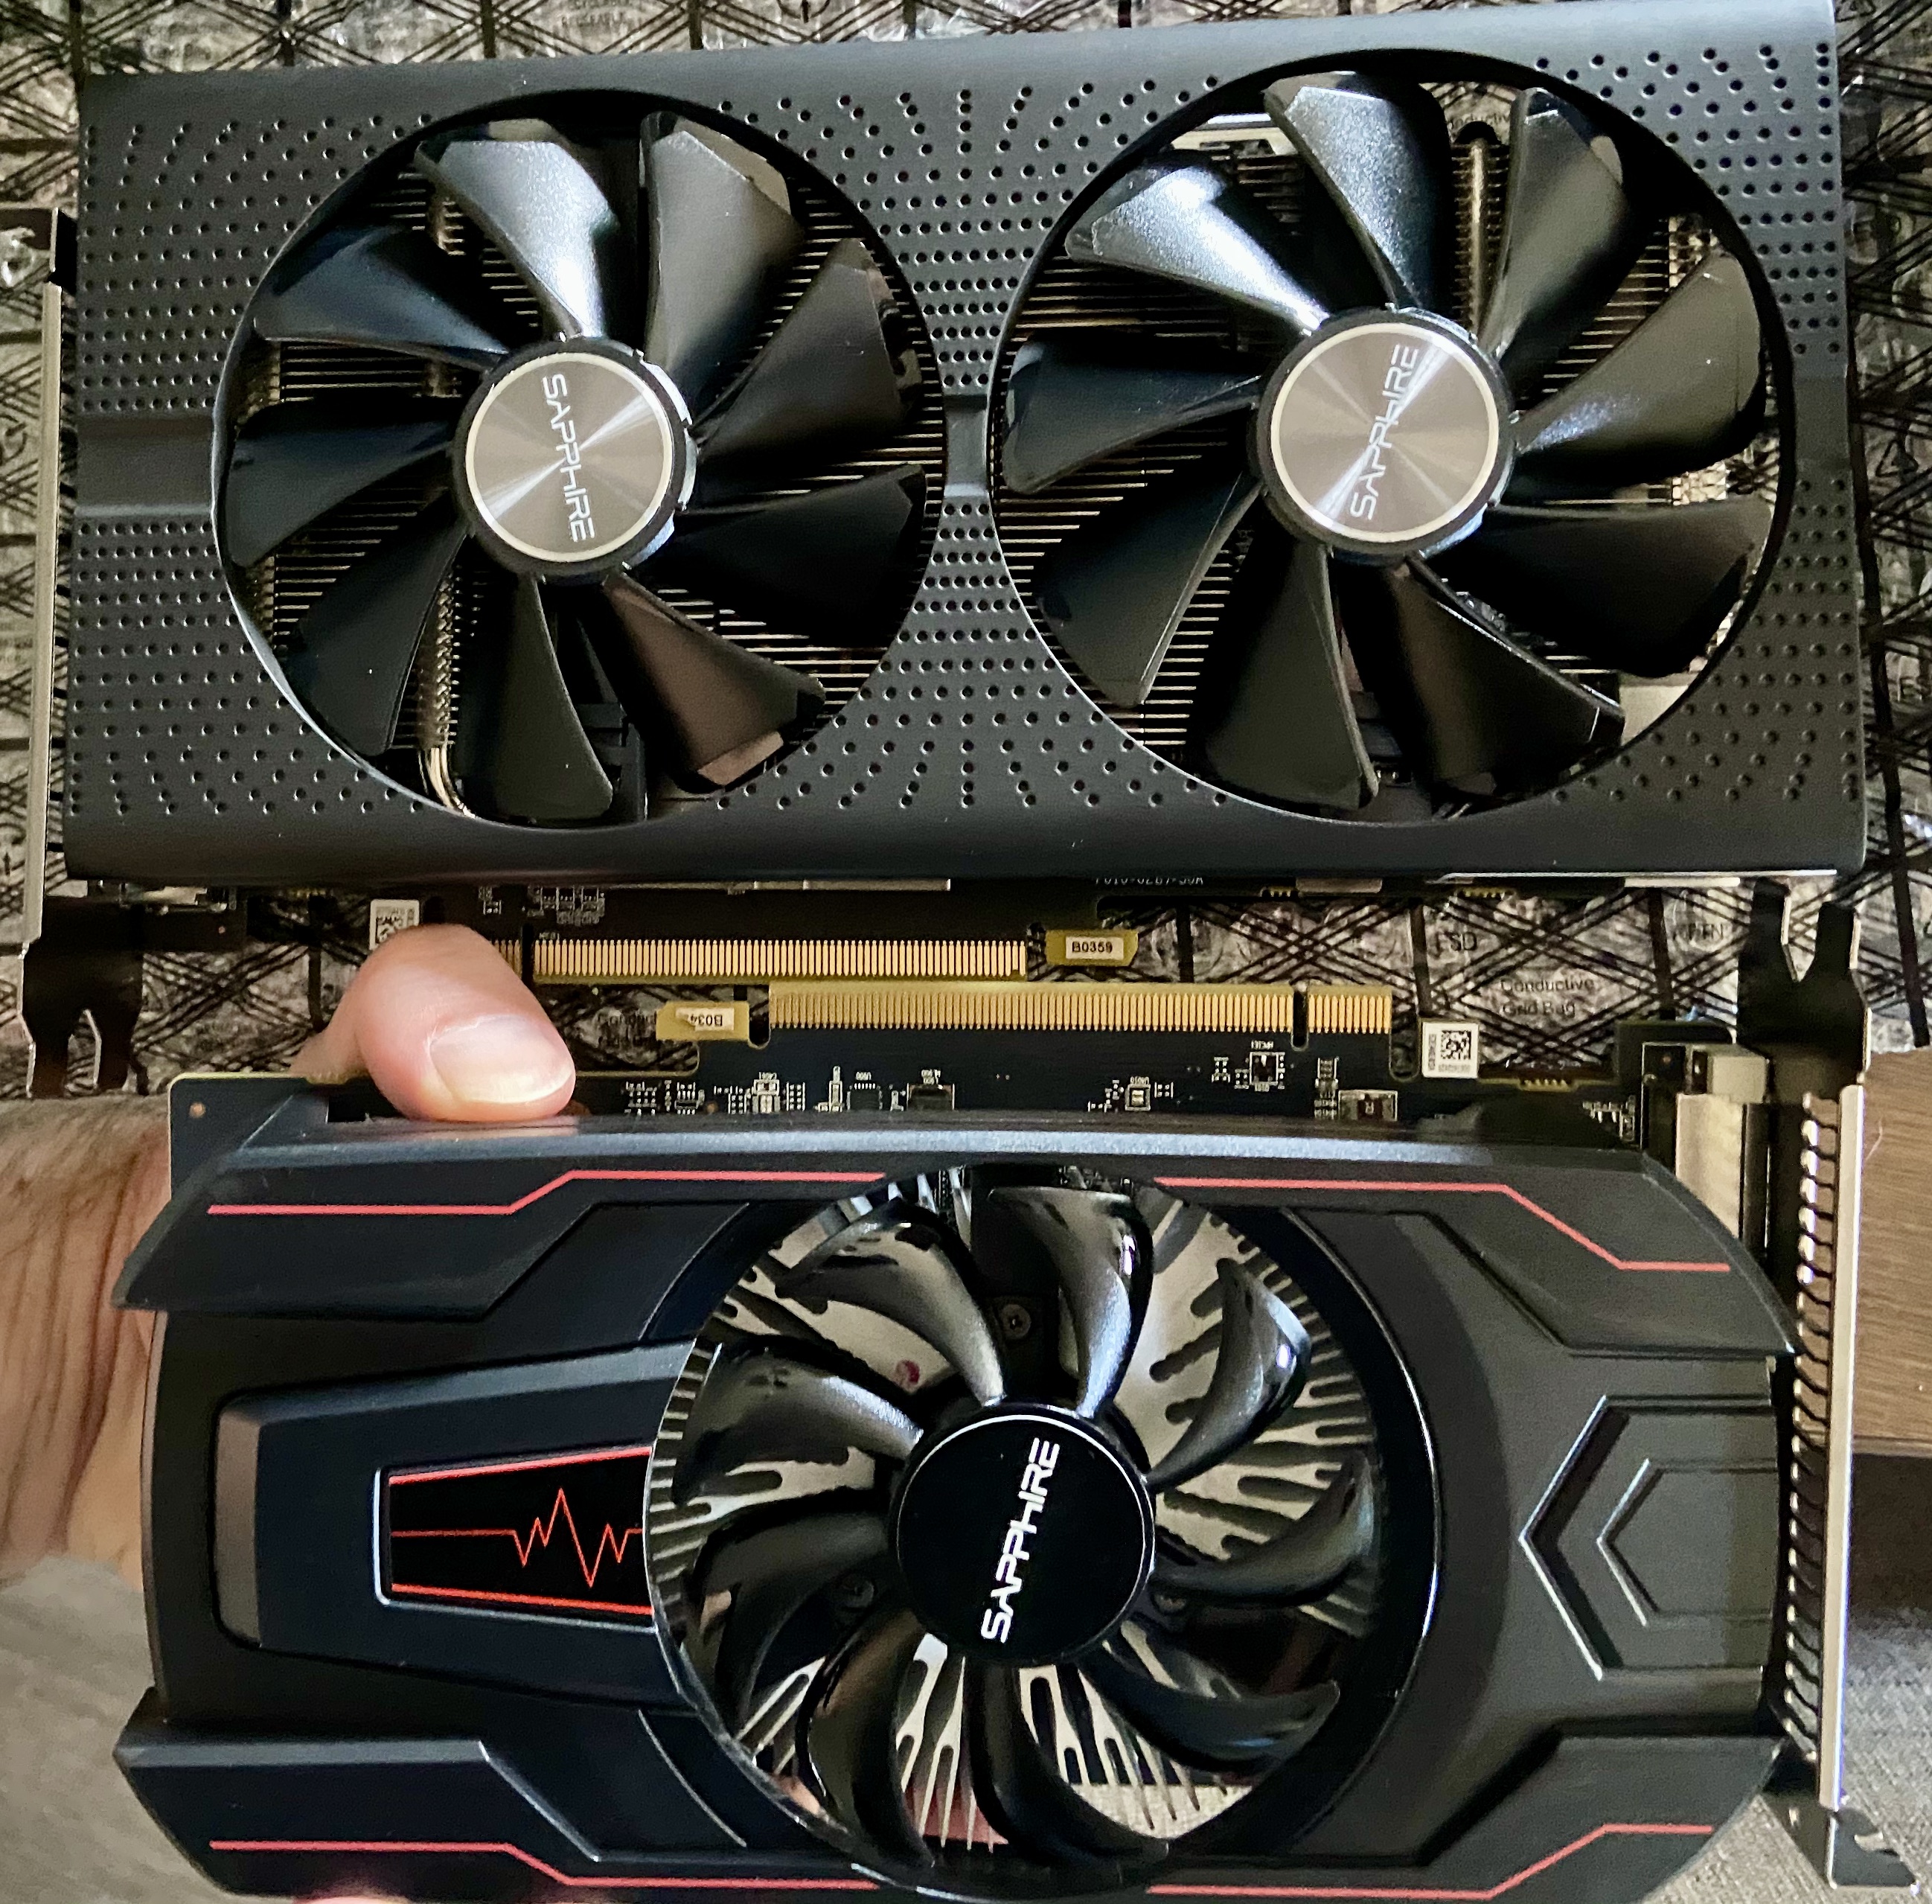 The rx560 and 580 side-by-side